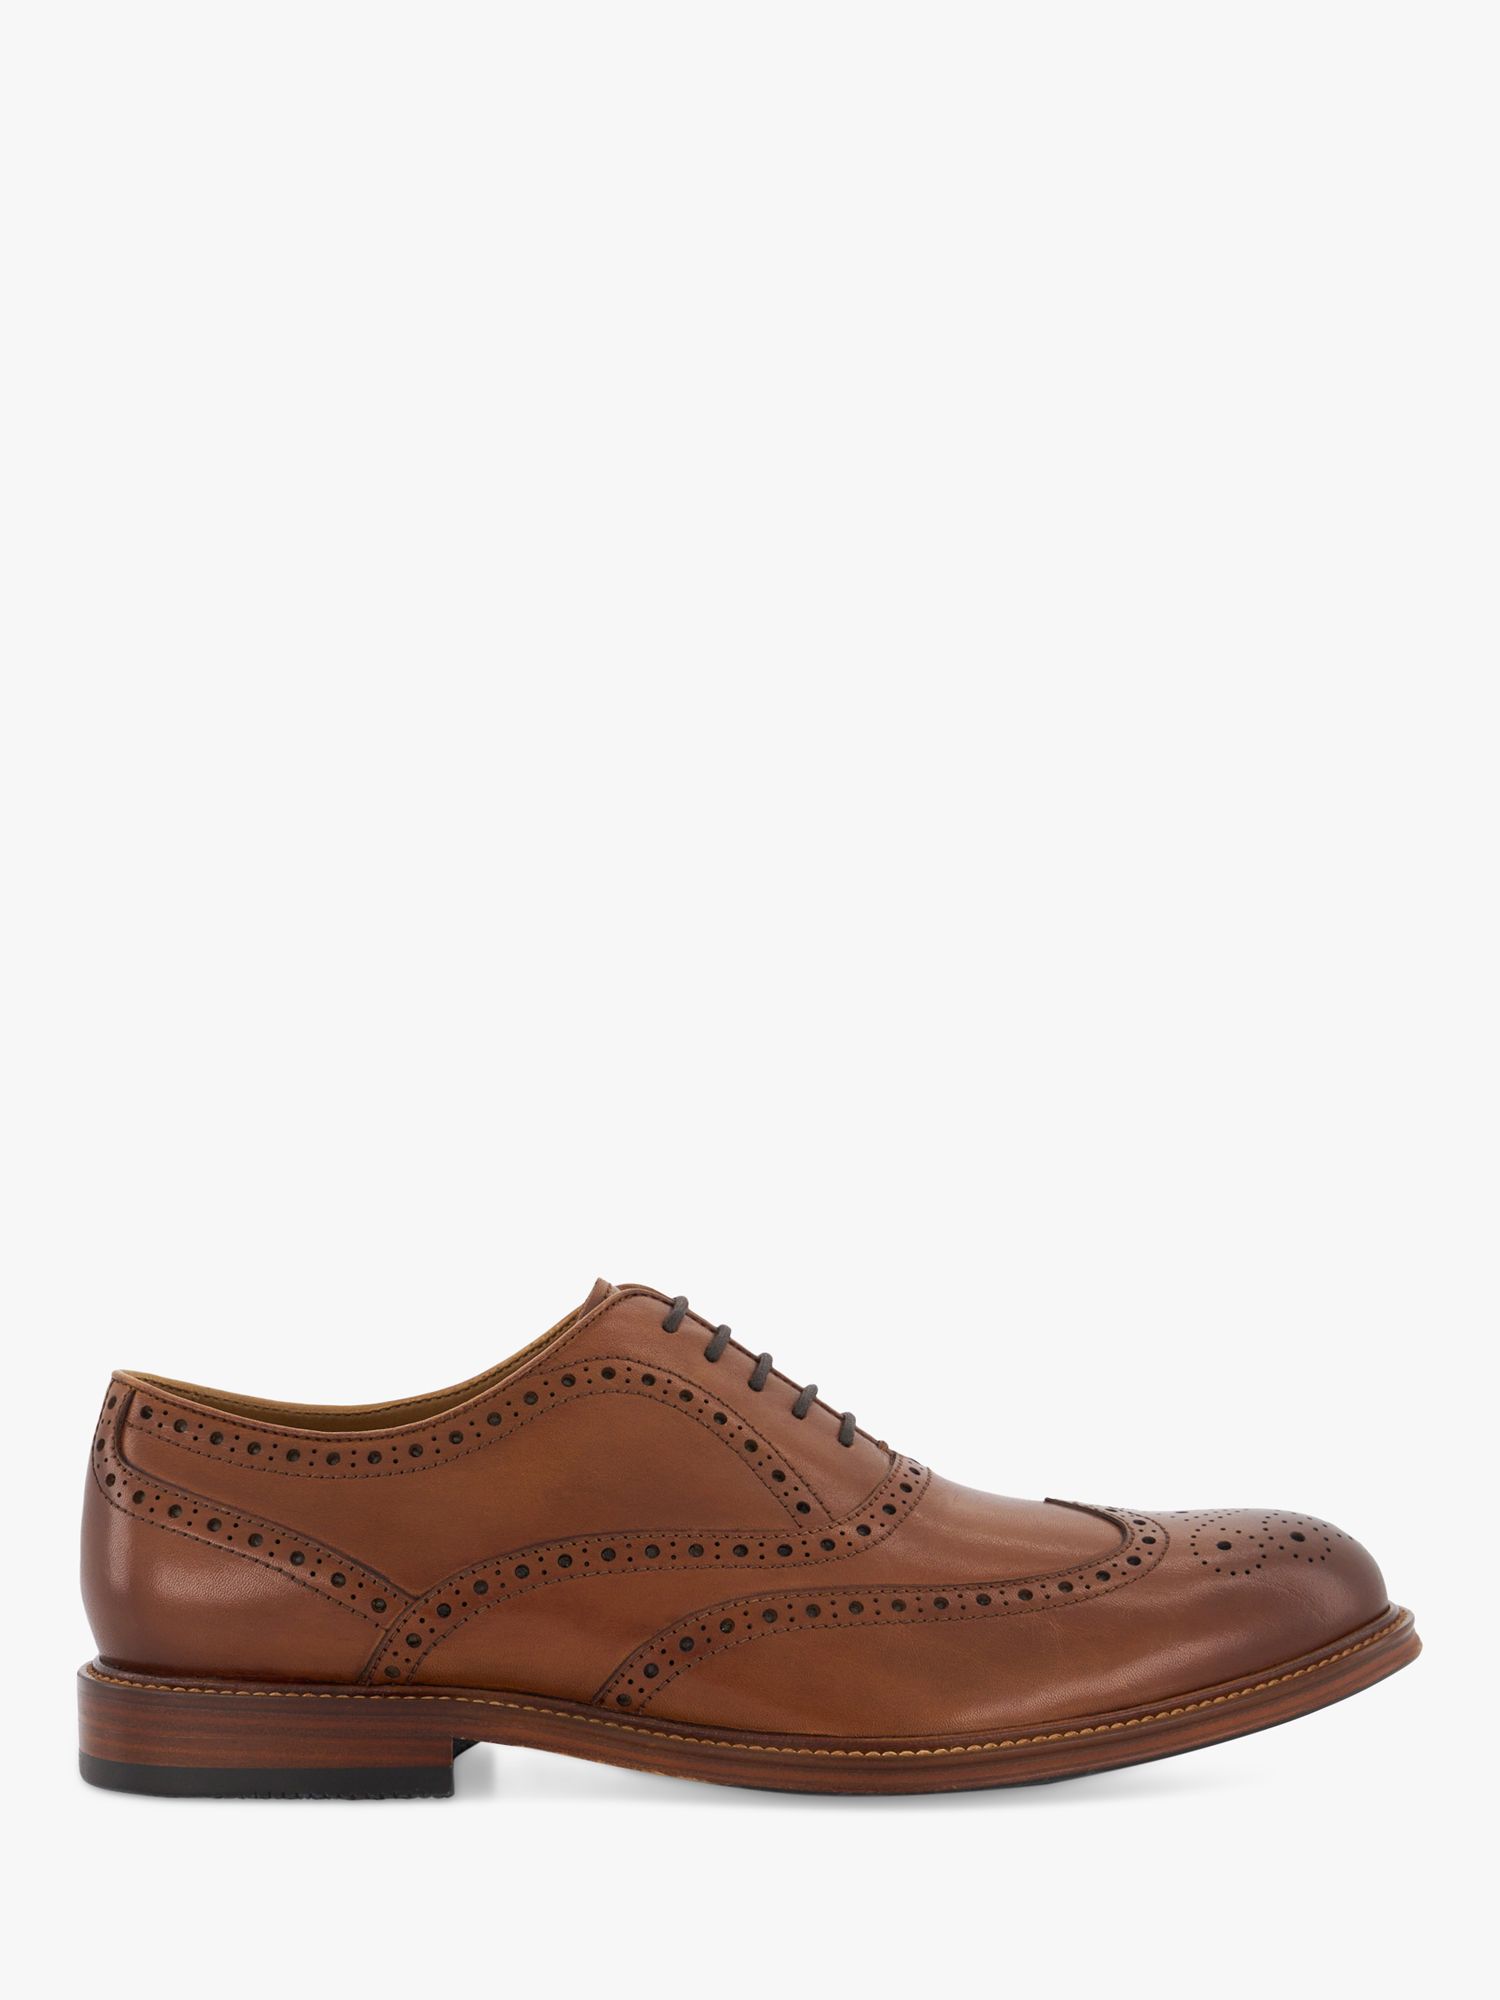 Dune Solihull Leather Brogue Shoes, Tan, 6